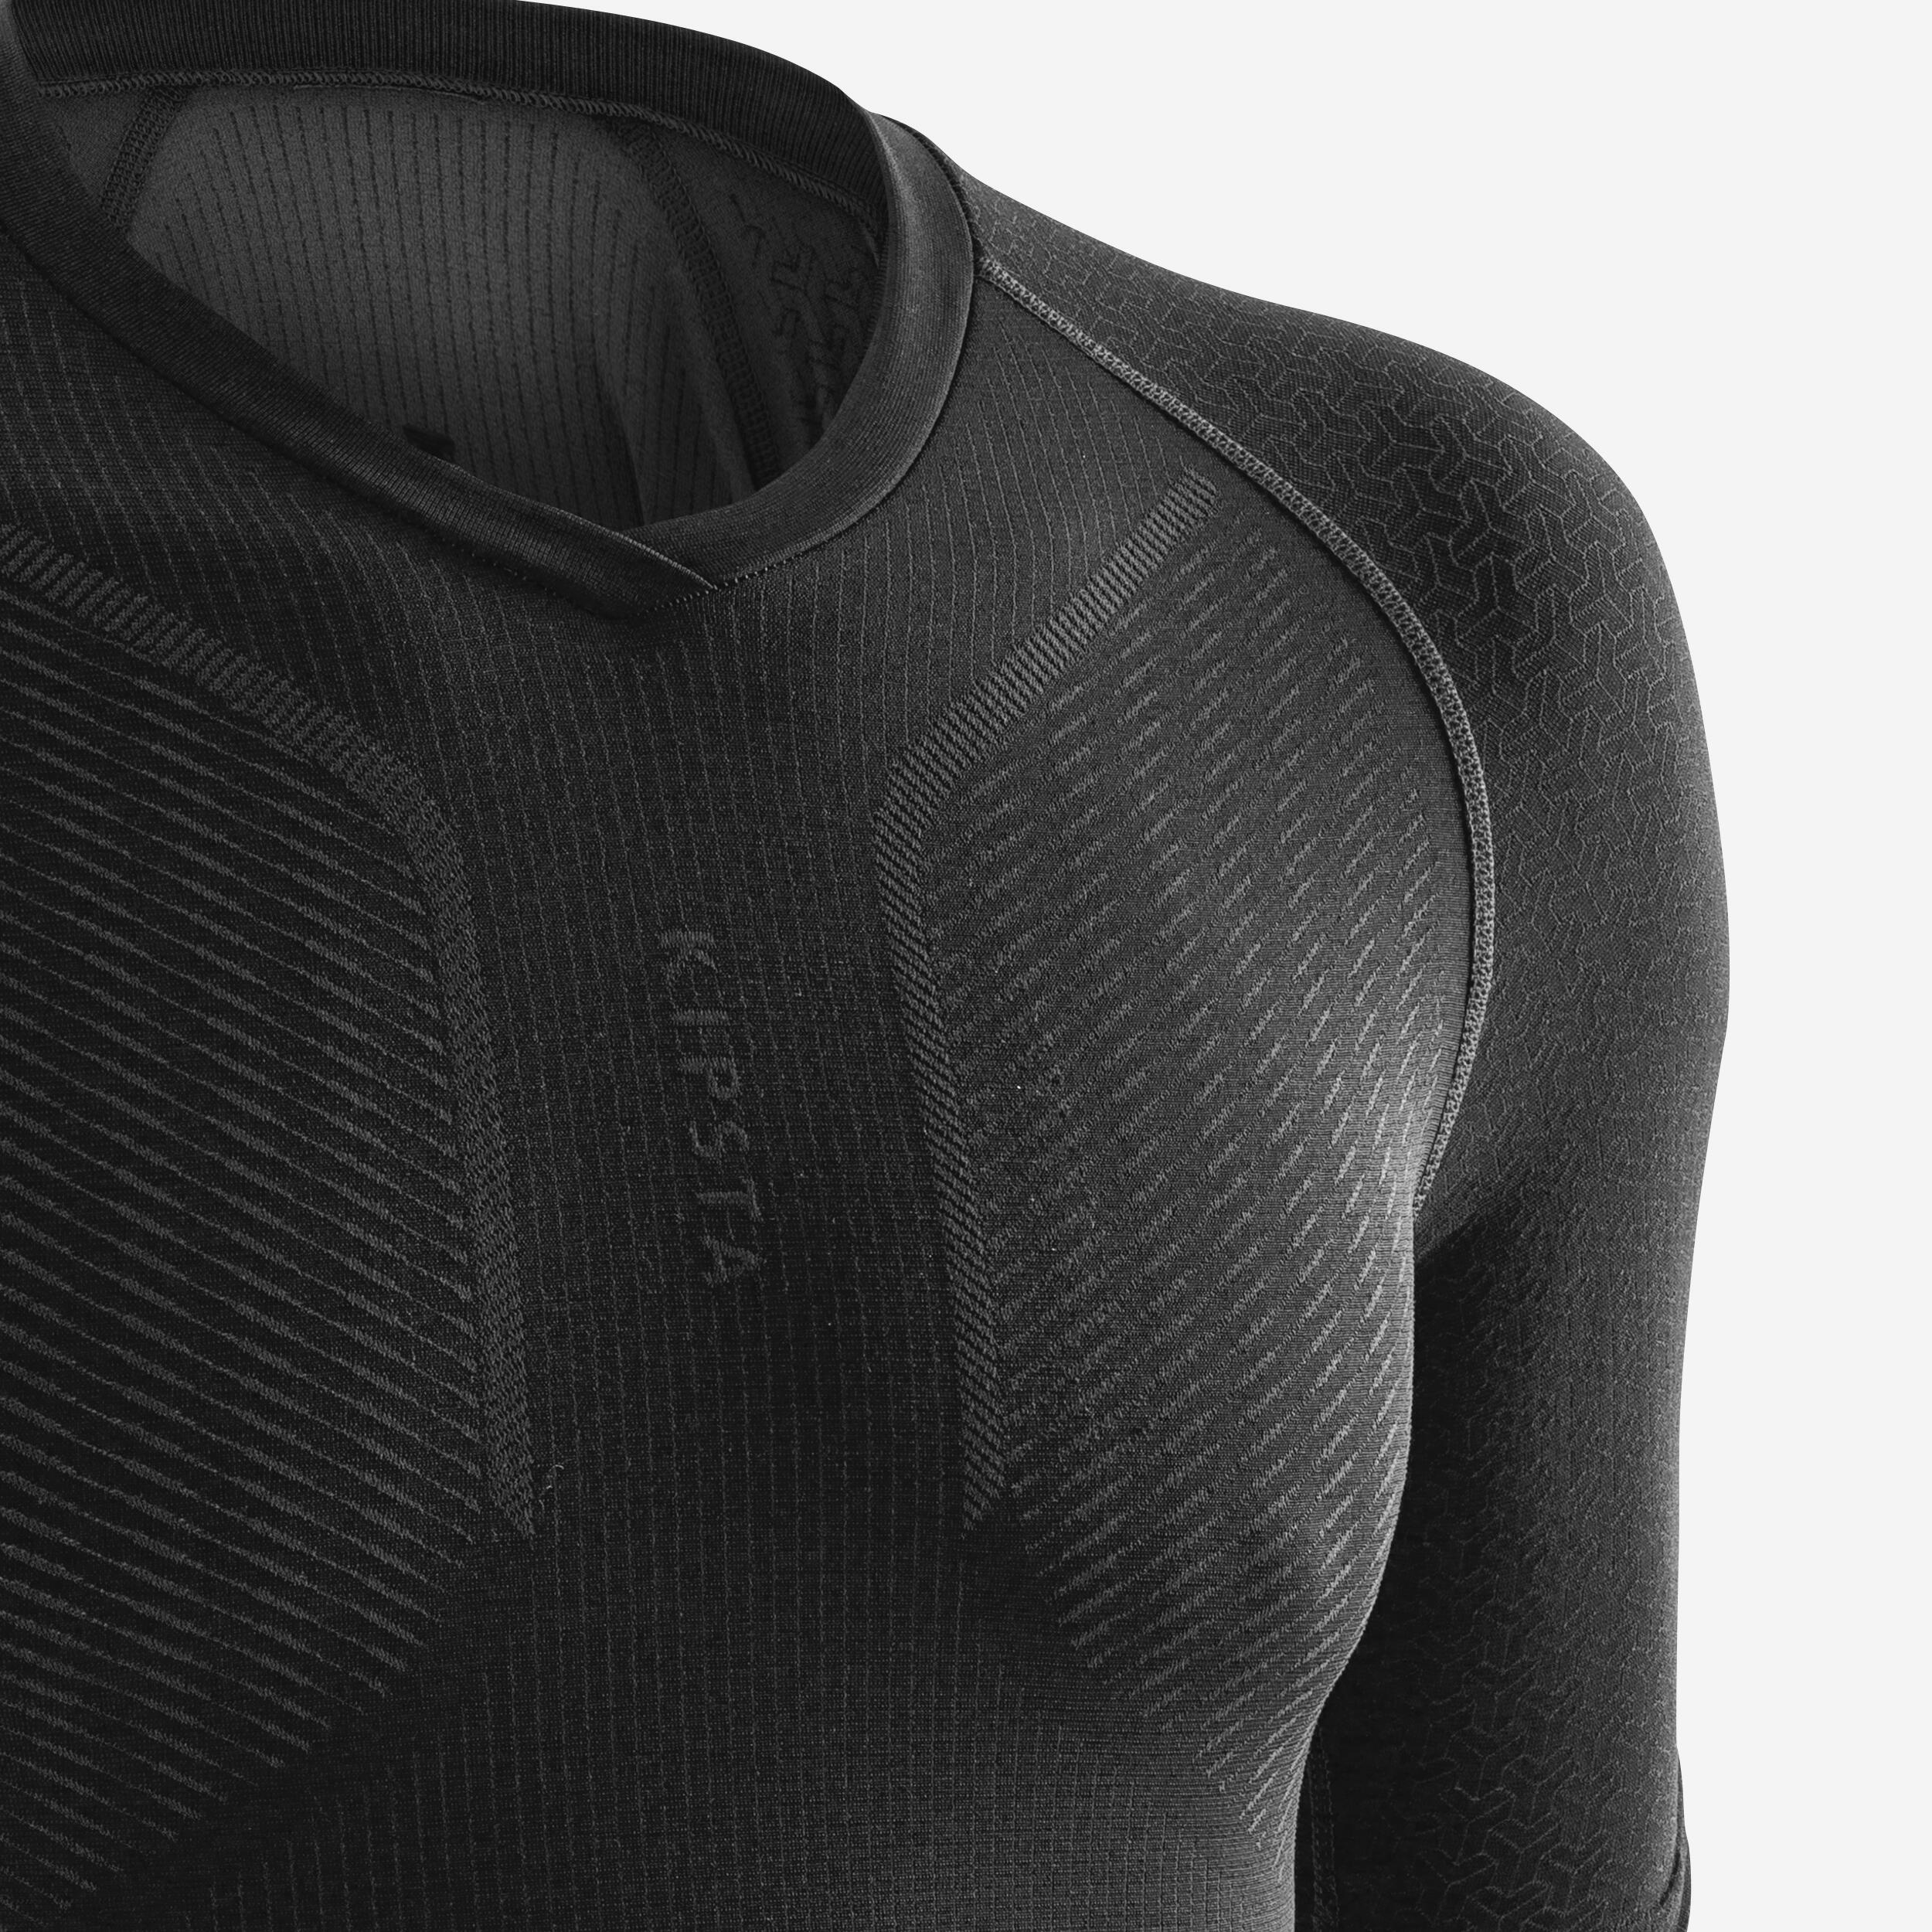 Adult Short-Sleeved Thermal Base Layer Top Keepdry 500 - Black 5/6